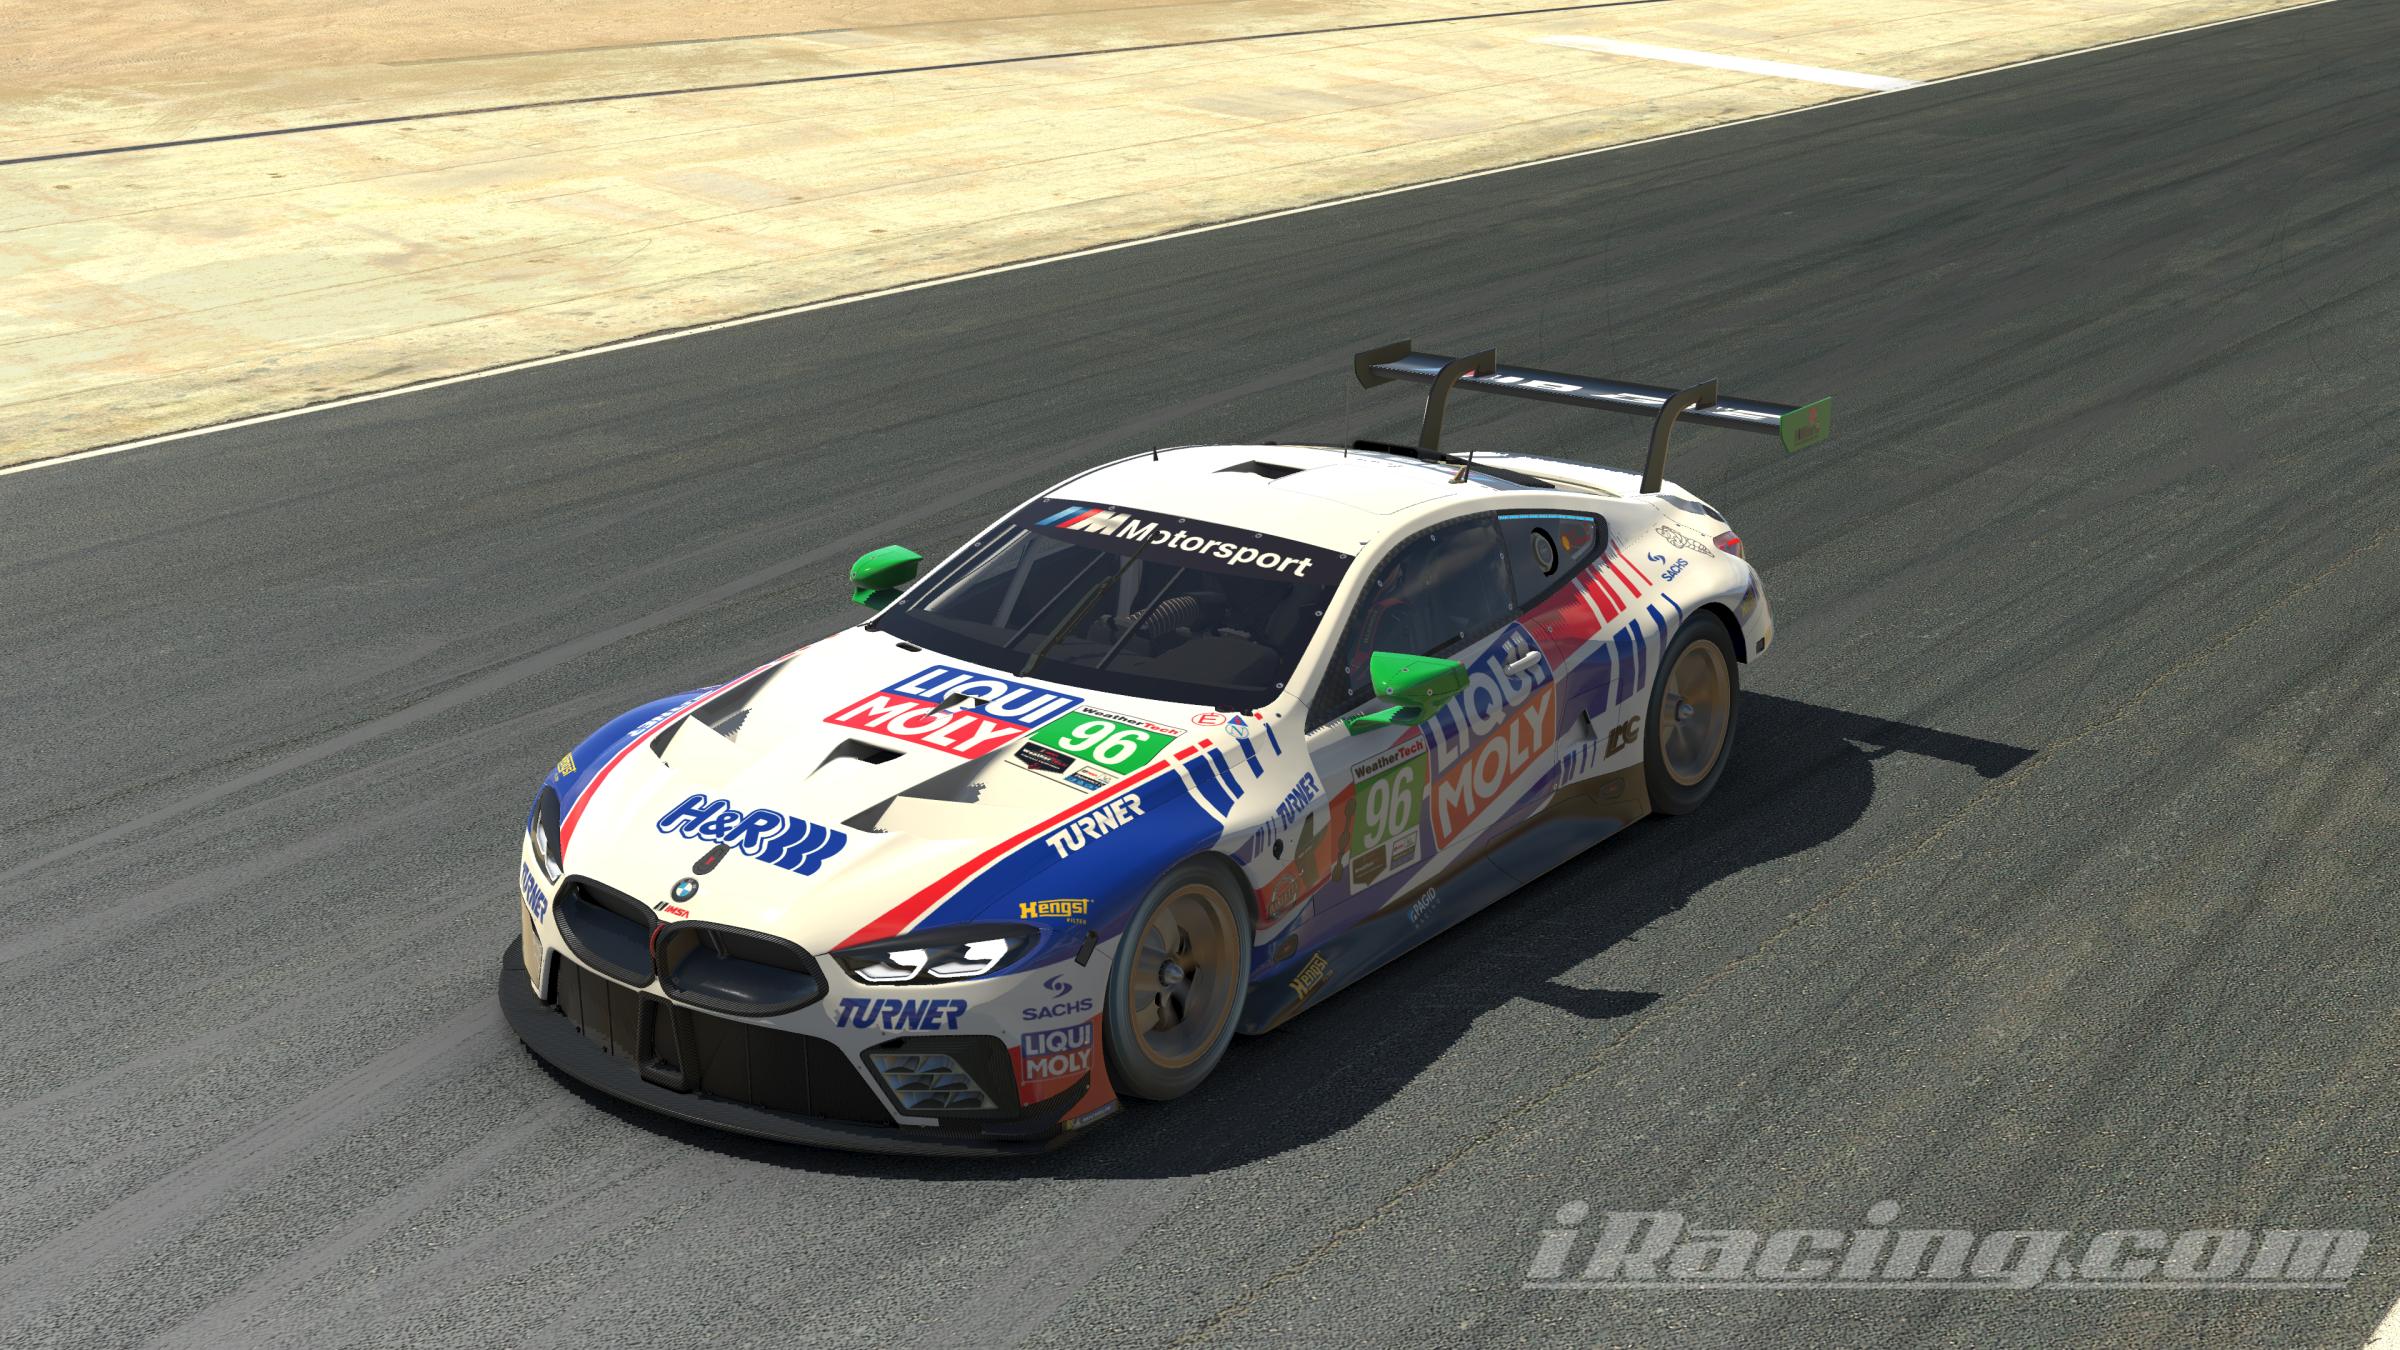 Preview of BMW M8 GTE - 2020 TURNER LIQUI MOLY by Andrew Blackmore